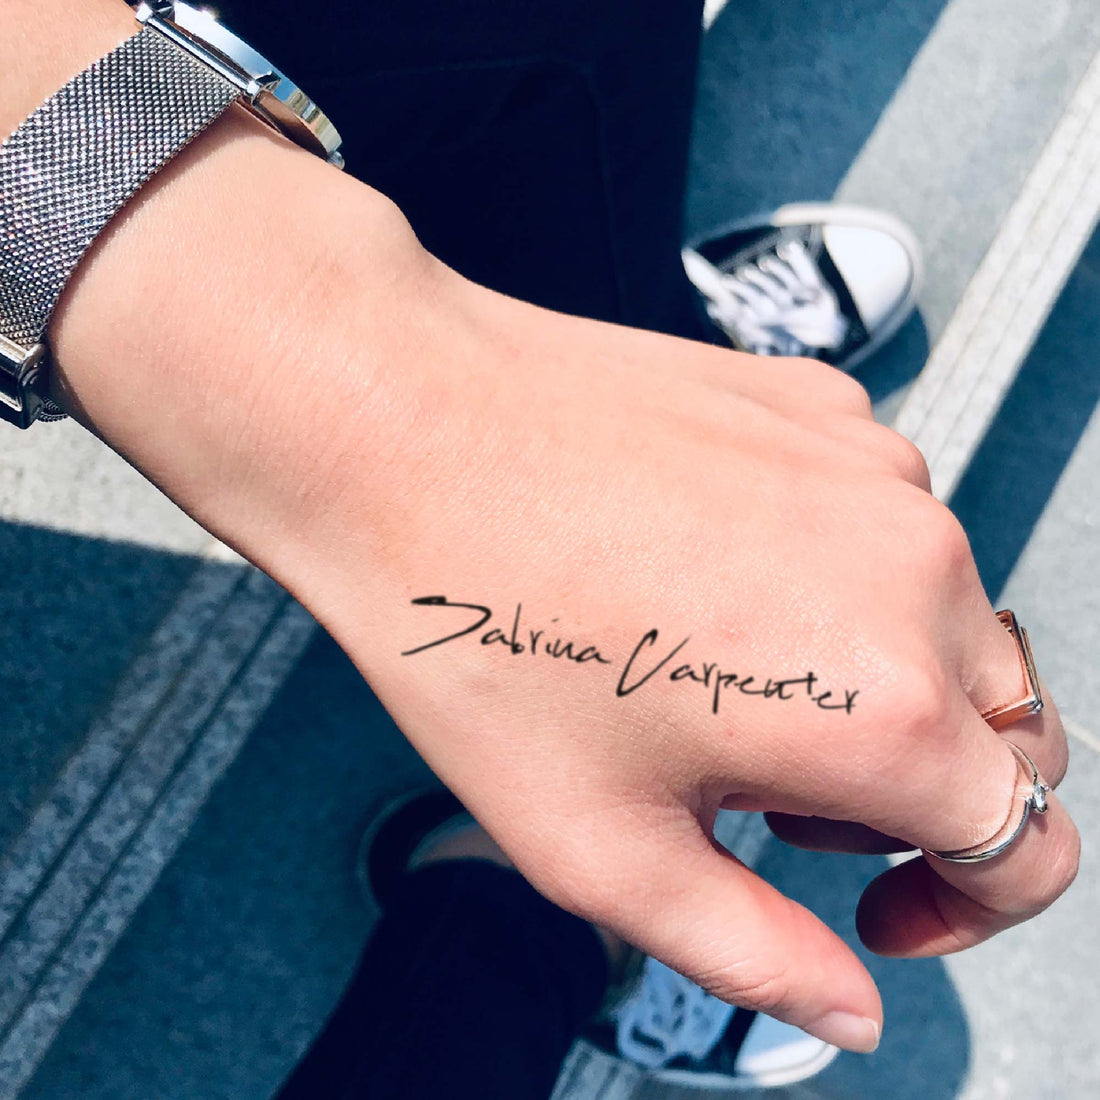 Sabrina Carpenter custom temporary tattoo sticker design idea inspiration meanings removal arm wrist hand words font name signature calligraphy lyrics tour concert outfits merch accessory gift souvenir costumes wear dress up code